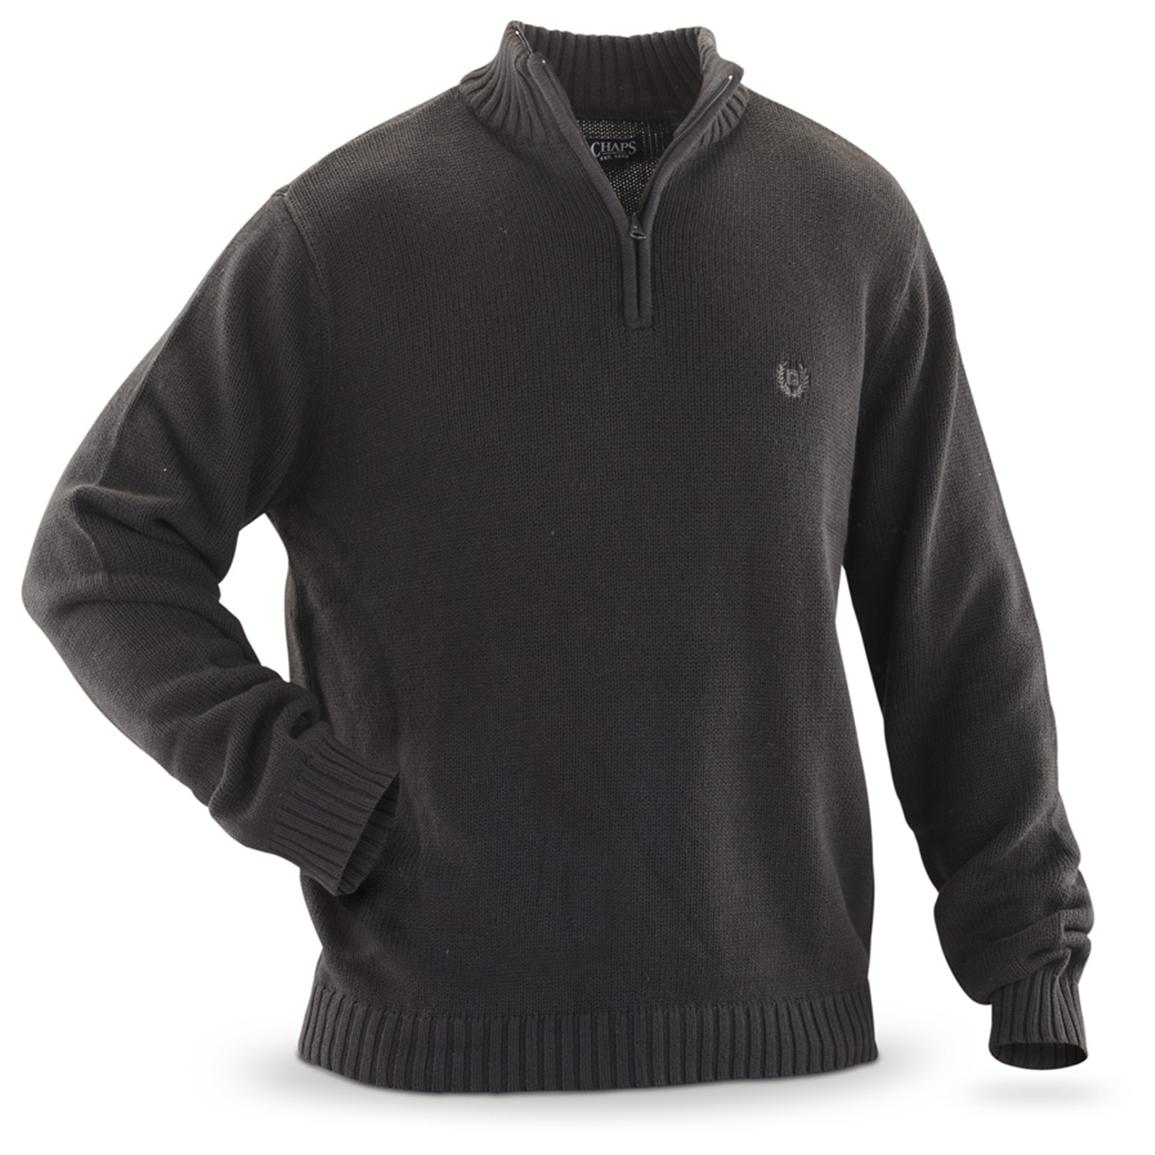 Men's Chaps® 1/4 - zip Sweater - 235973, Sweaters at Sportsman's Guide